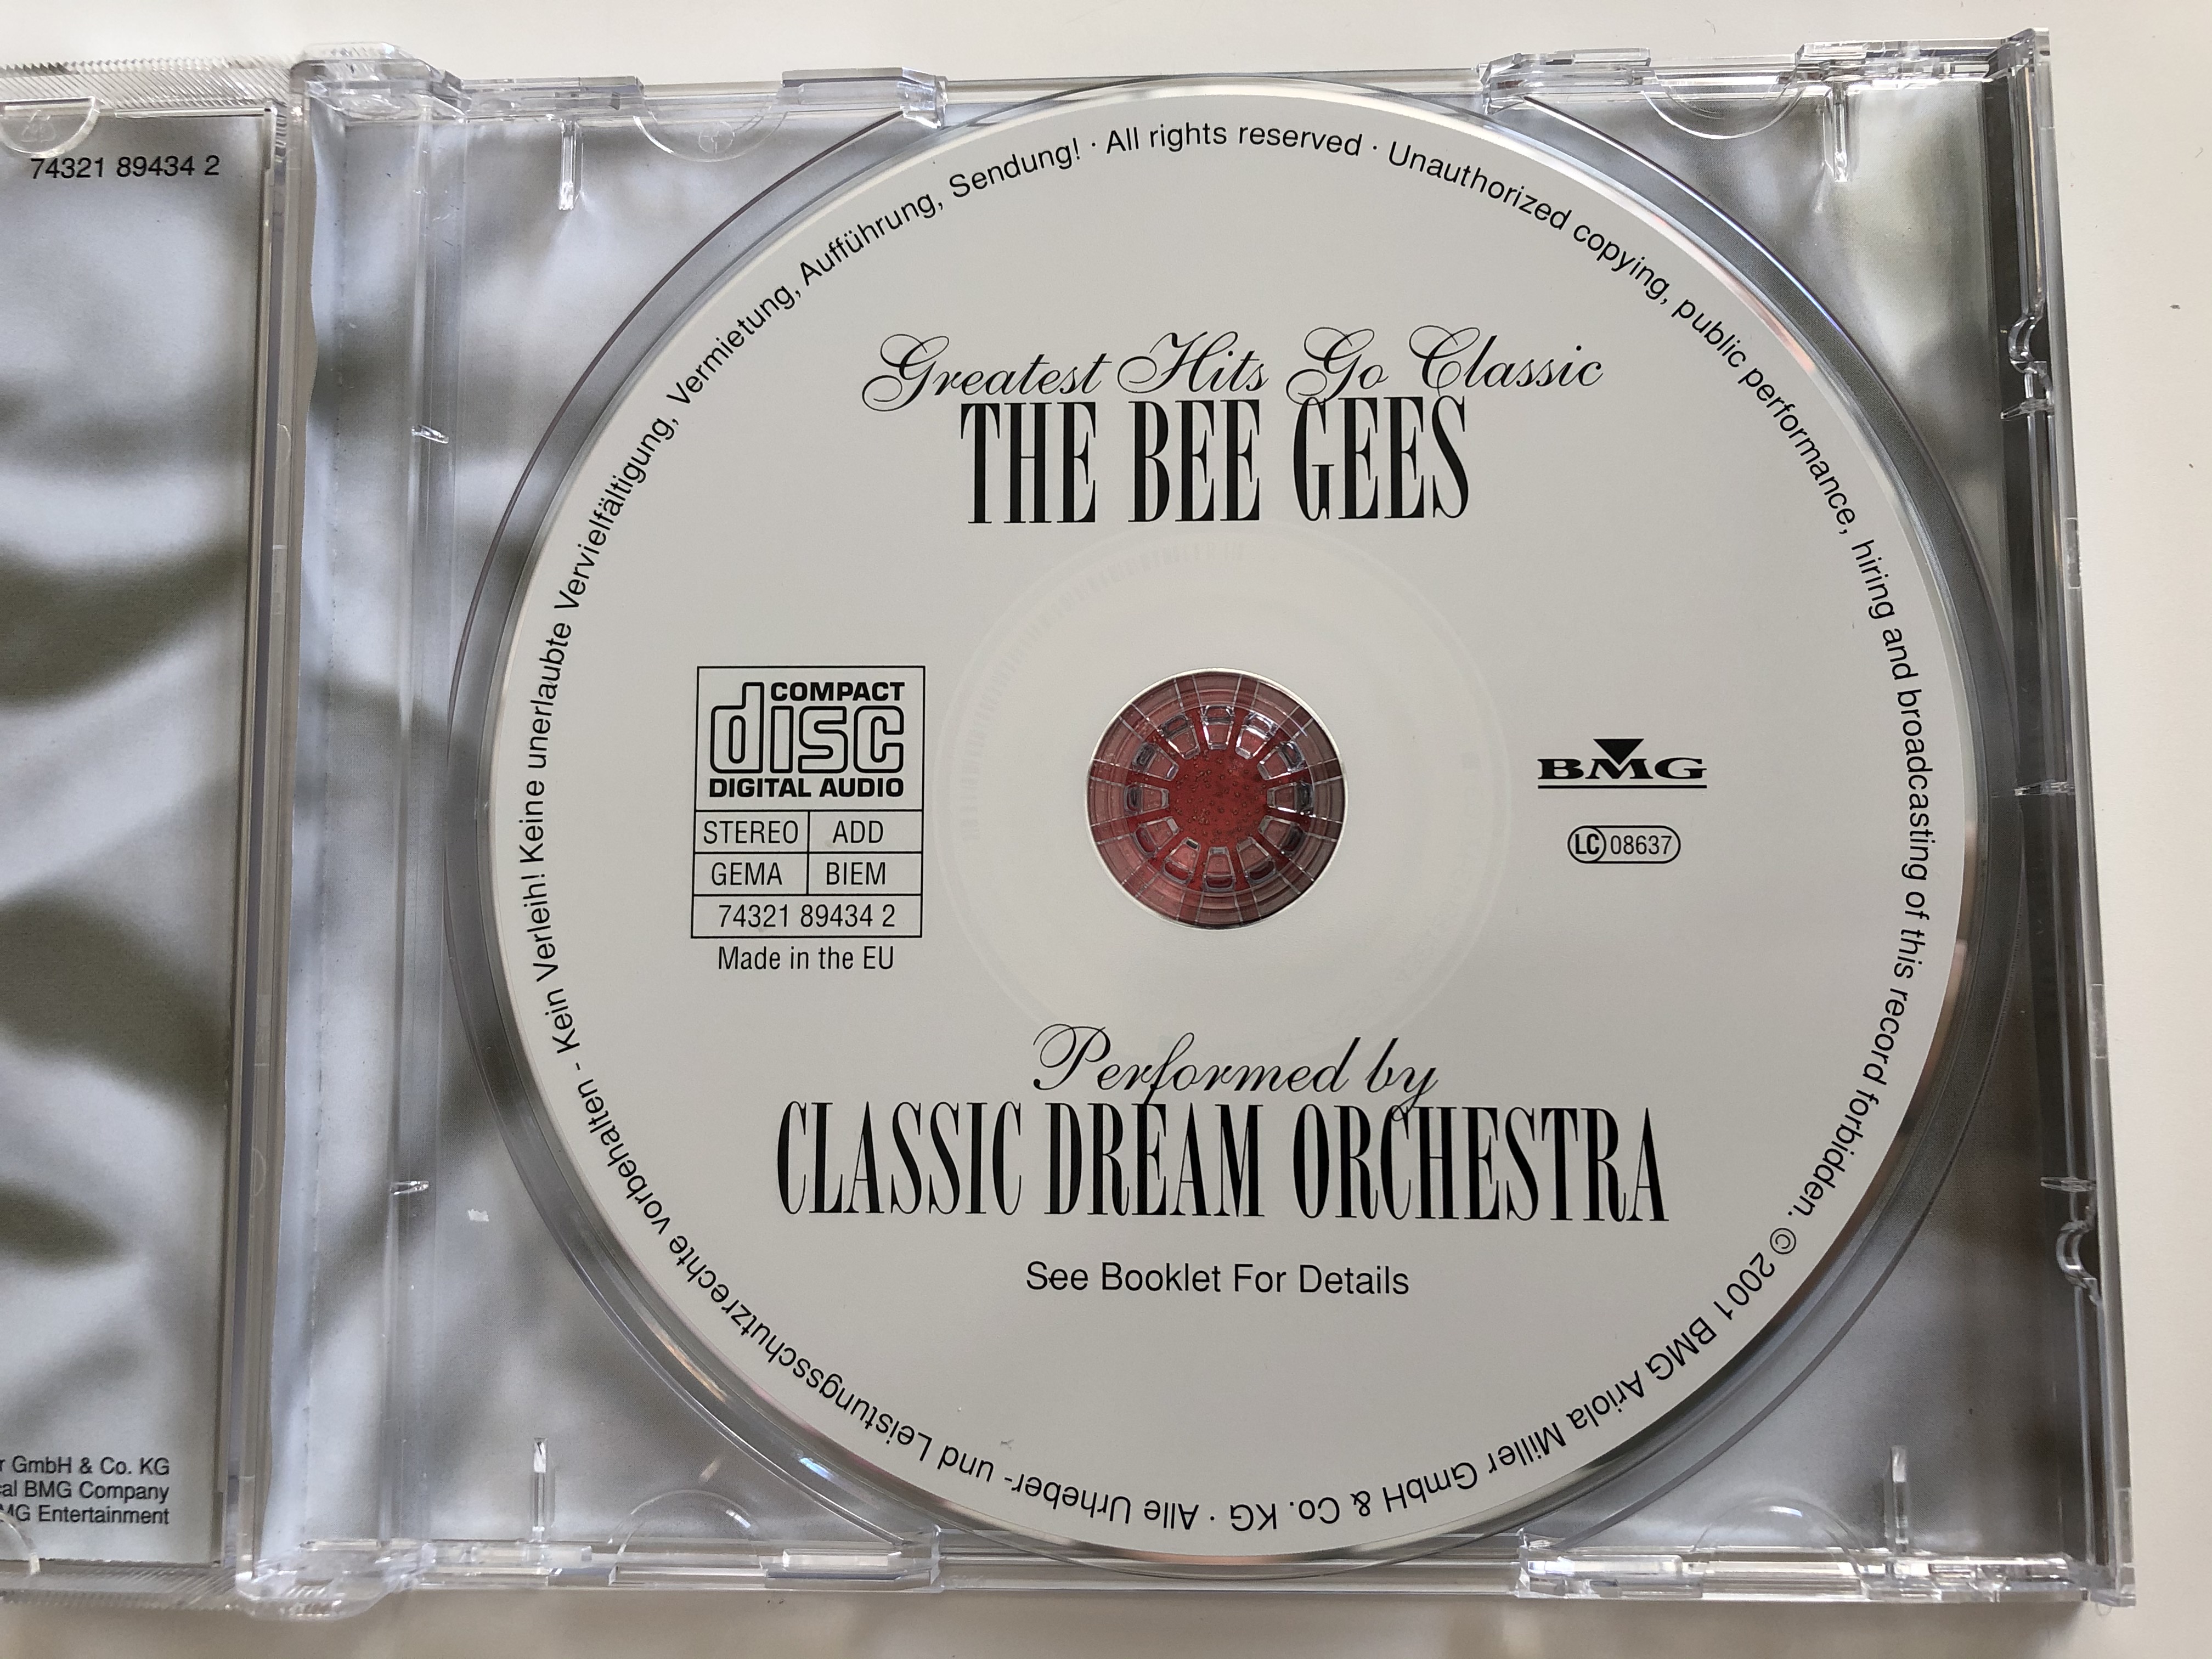 greatest-hits-go-classic-the-bee-gees-performed-by-classic-dream-orchestra-bmg-audio-cd-2001-stereo-74321-89434-2-4-.jpg